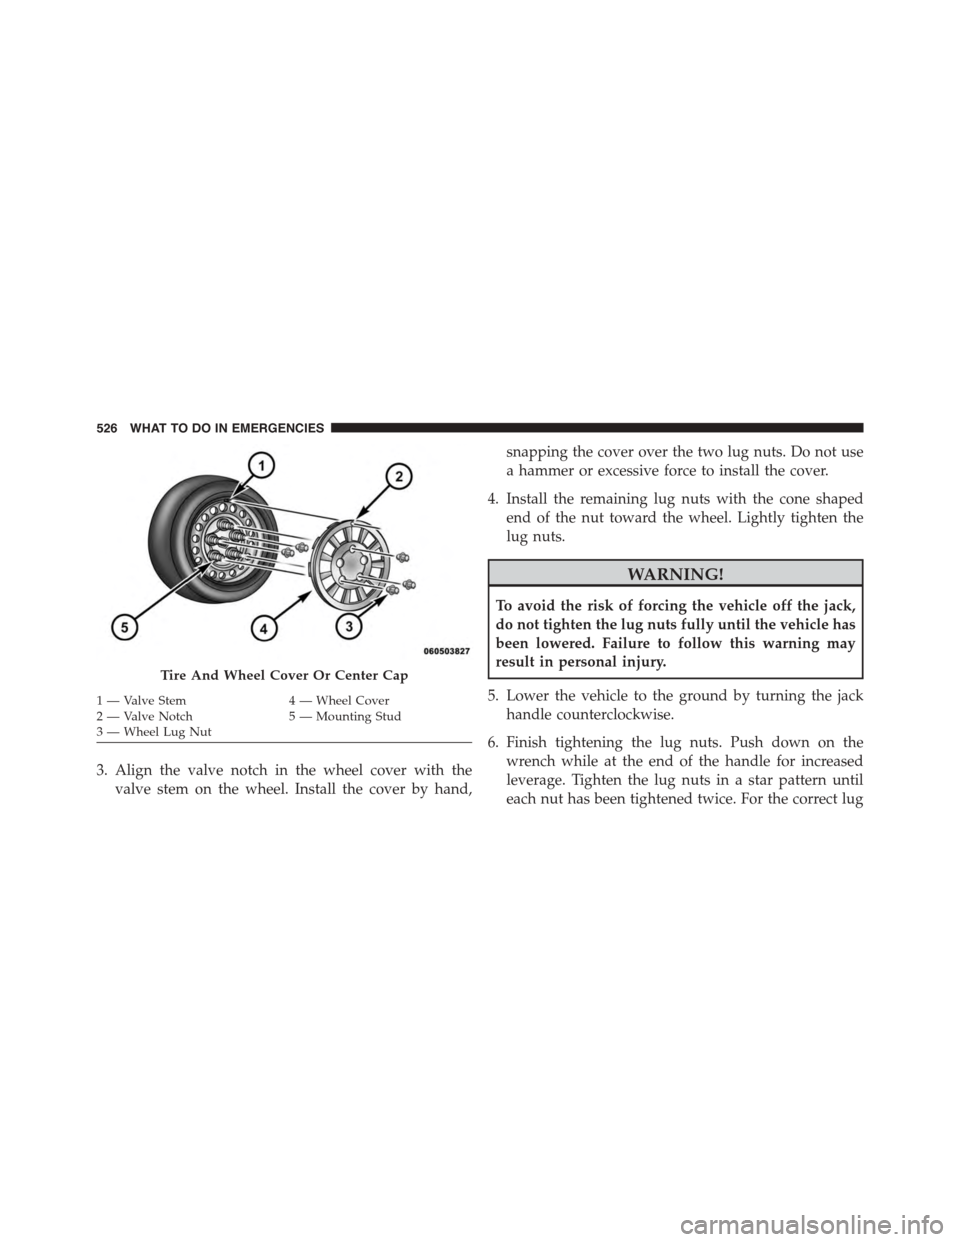 DODGE JOURNEY 2015 1.G Owners Manual 3. Align the valve notch in the wheel cover with the
valve stem on the wheel. Install the cover by hand,
snapping the cover over the two lug nuts. Do not use
a hammer or excessive force to install the